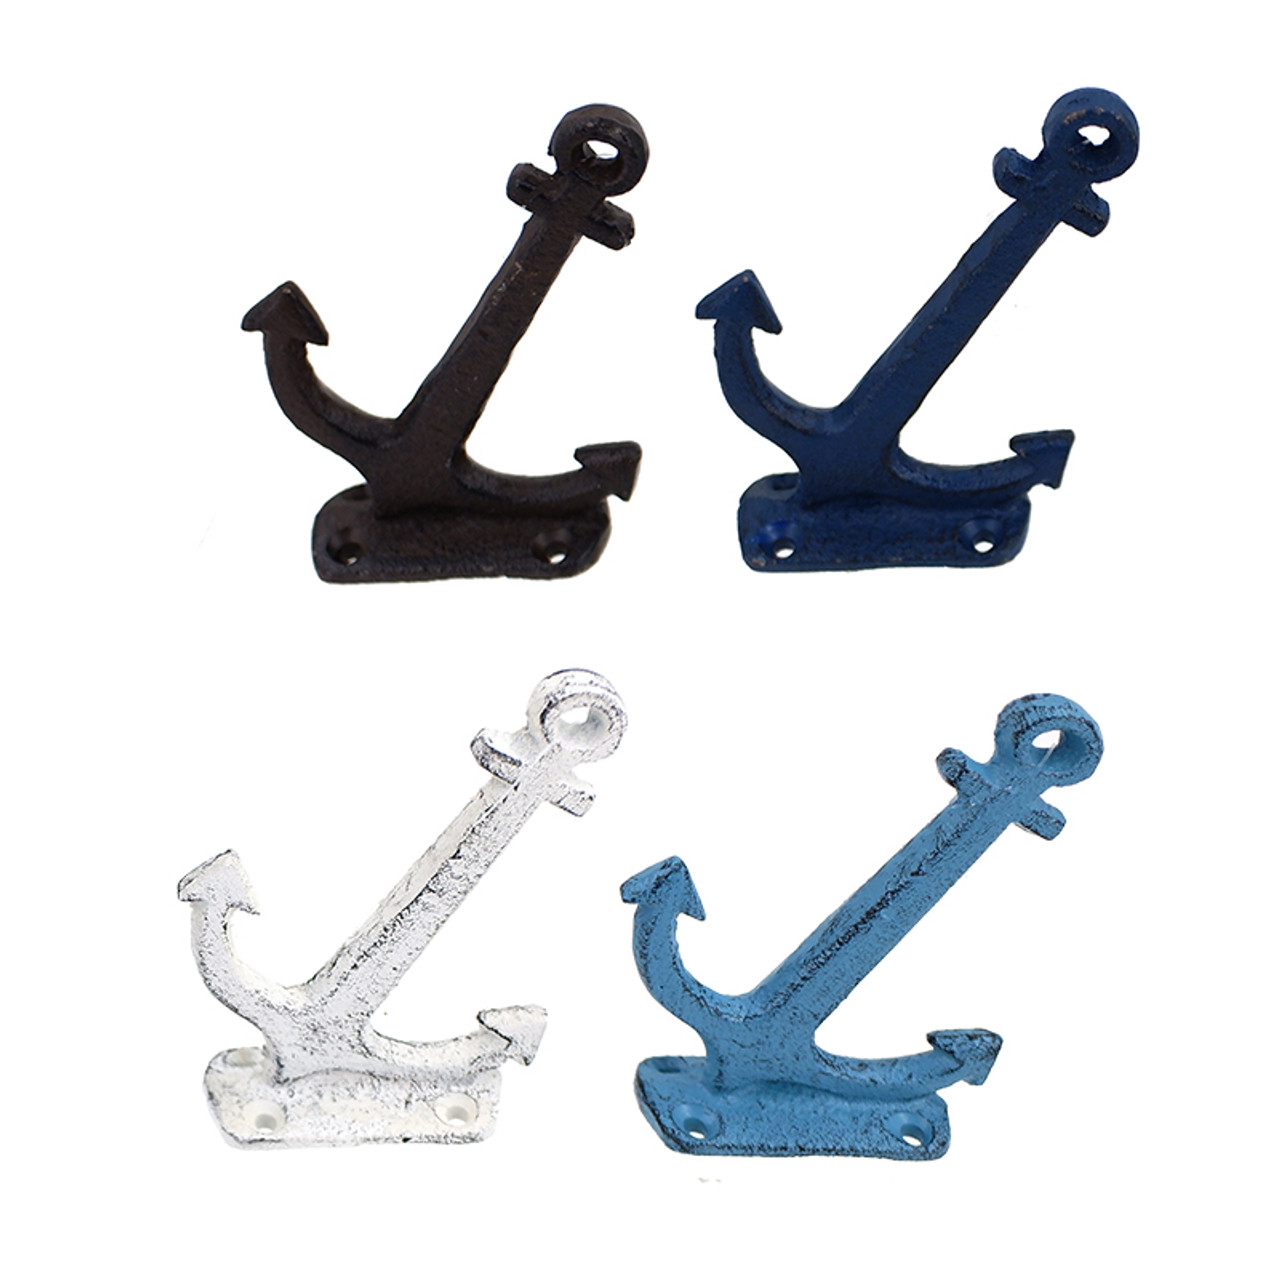 https://cdn11.bigcommerce.com/s-36f60/images/stencil/1280x1280/products/8260/17985/71917-angled-anchor-hooks__79717.1622767303.jpg?c=2